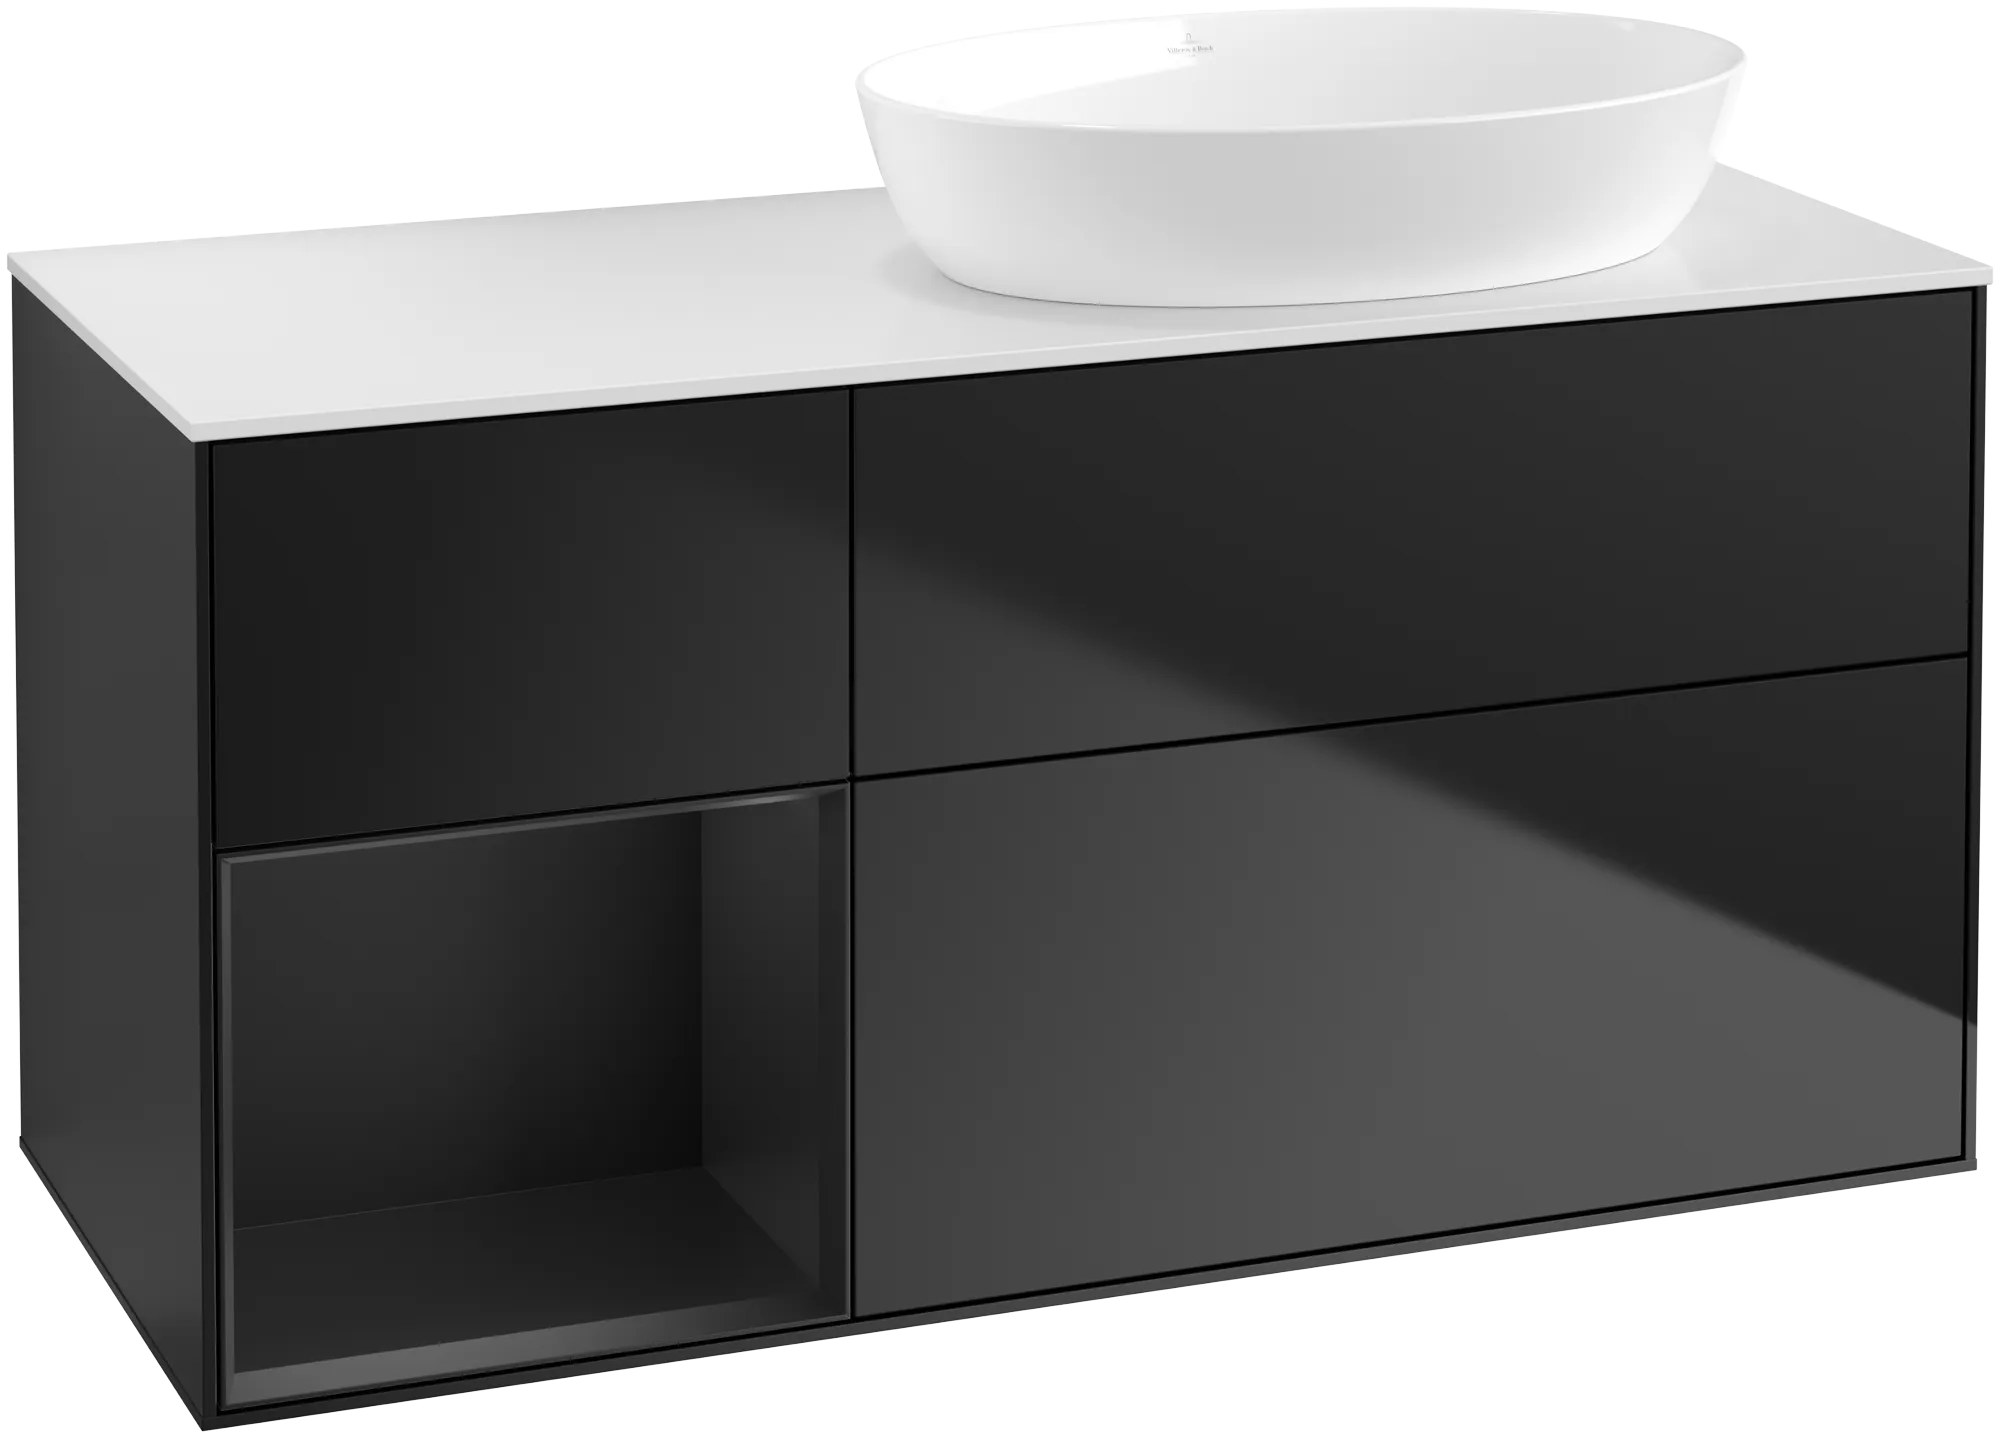 Picture of VILLEROY BOCH Finion Vanity unit, with lighting, 3 pull-out compartments, 1200 x 603 x 501 mm, Black Matt Lacquer / Black Matt Lacquer / Glass White Matt #GA41PDPD